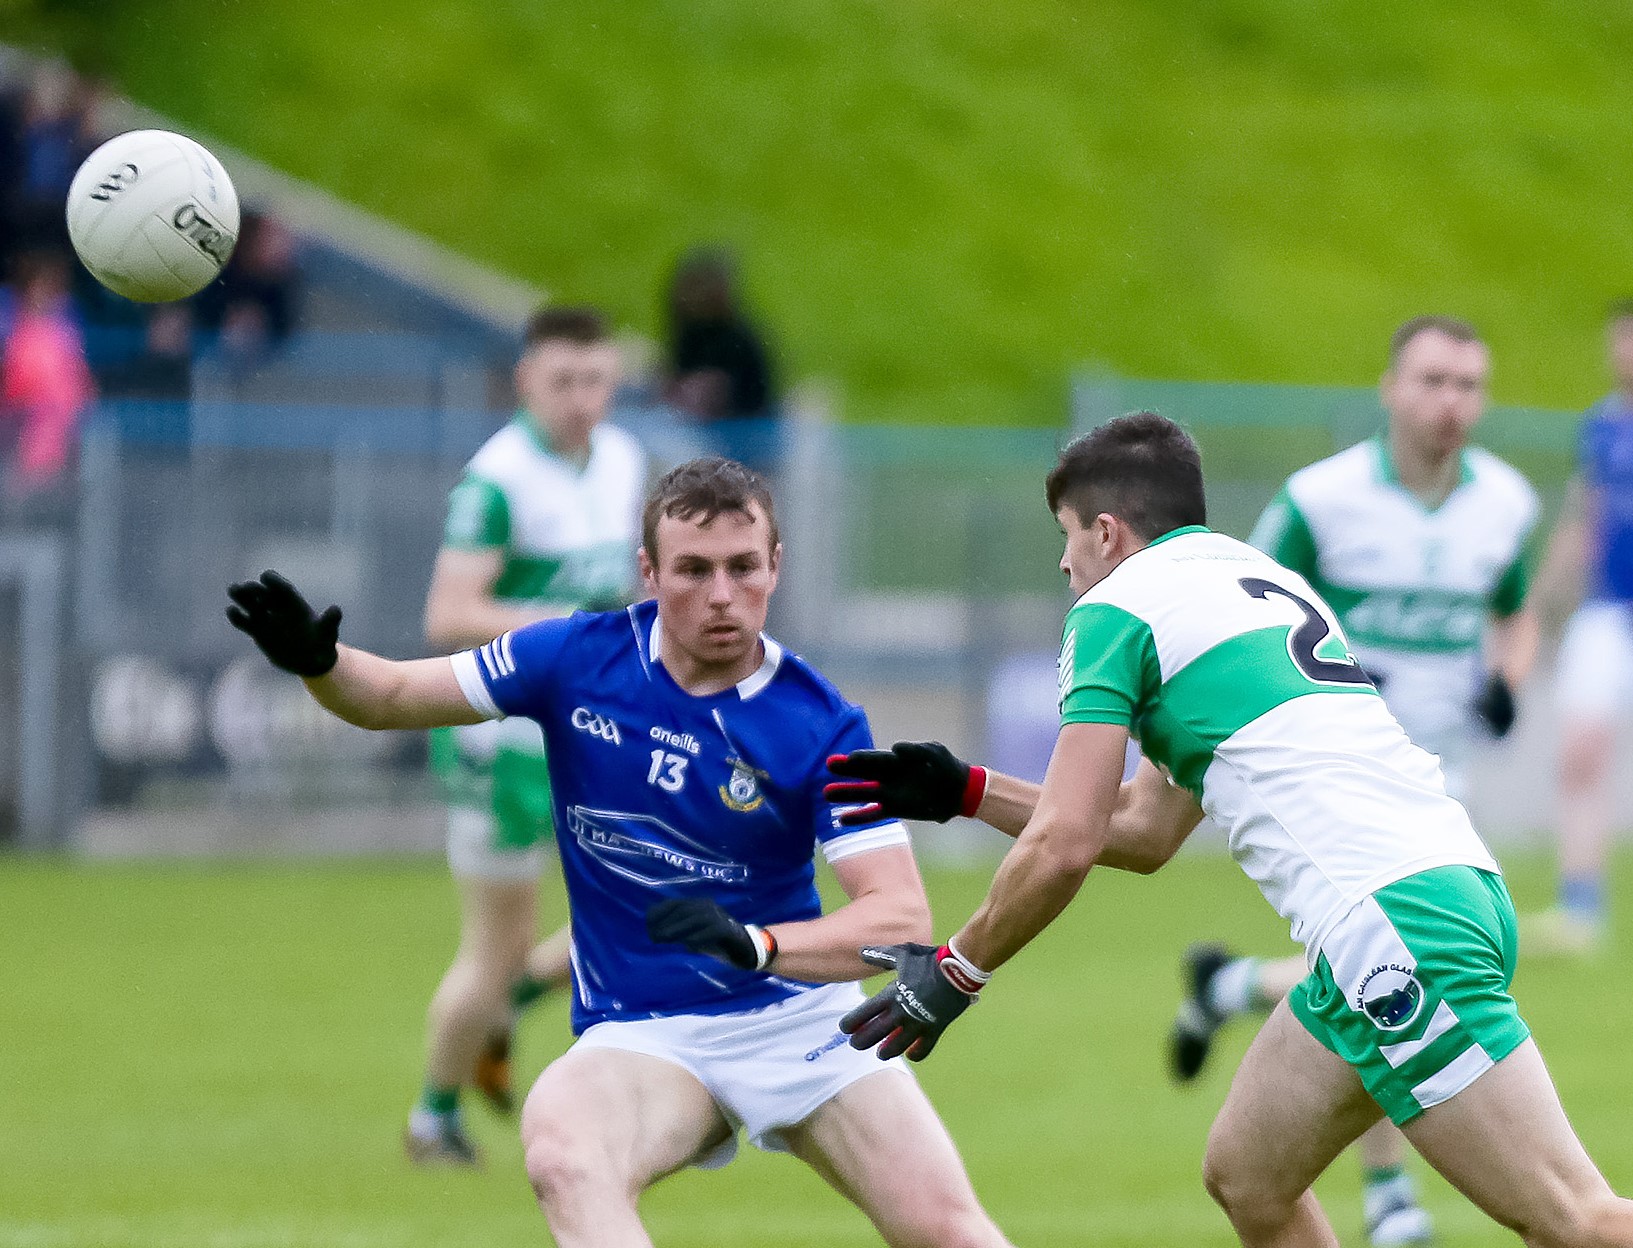 Dromore return to the summit